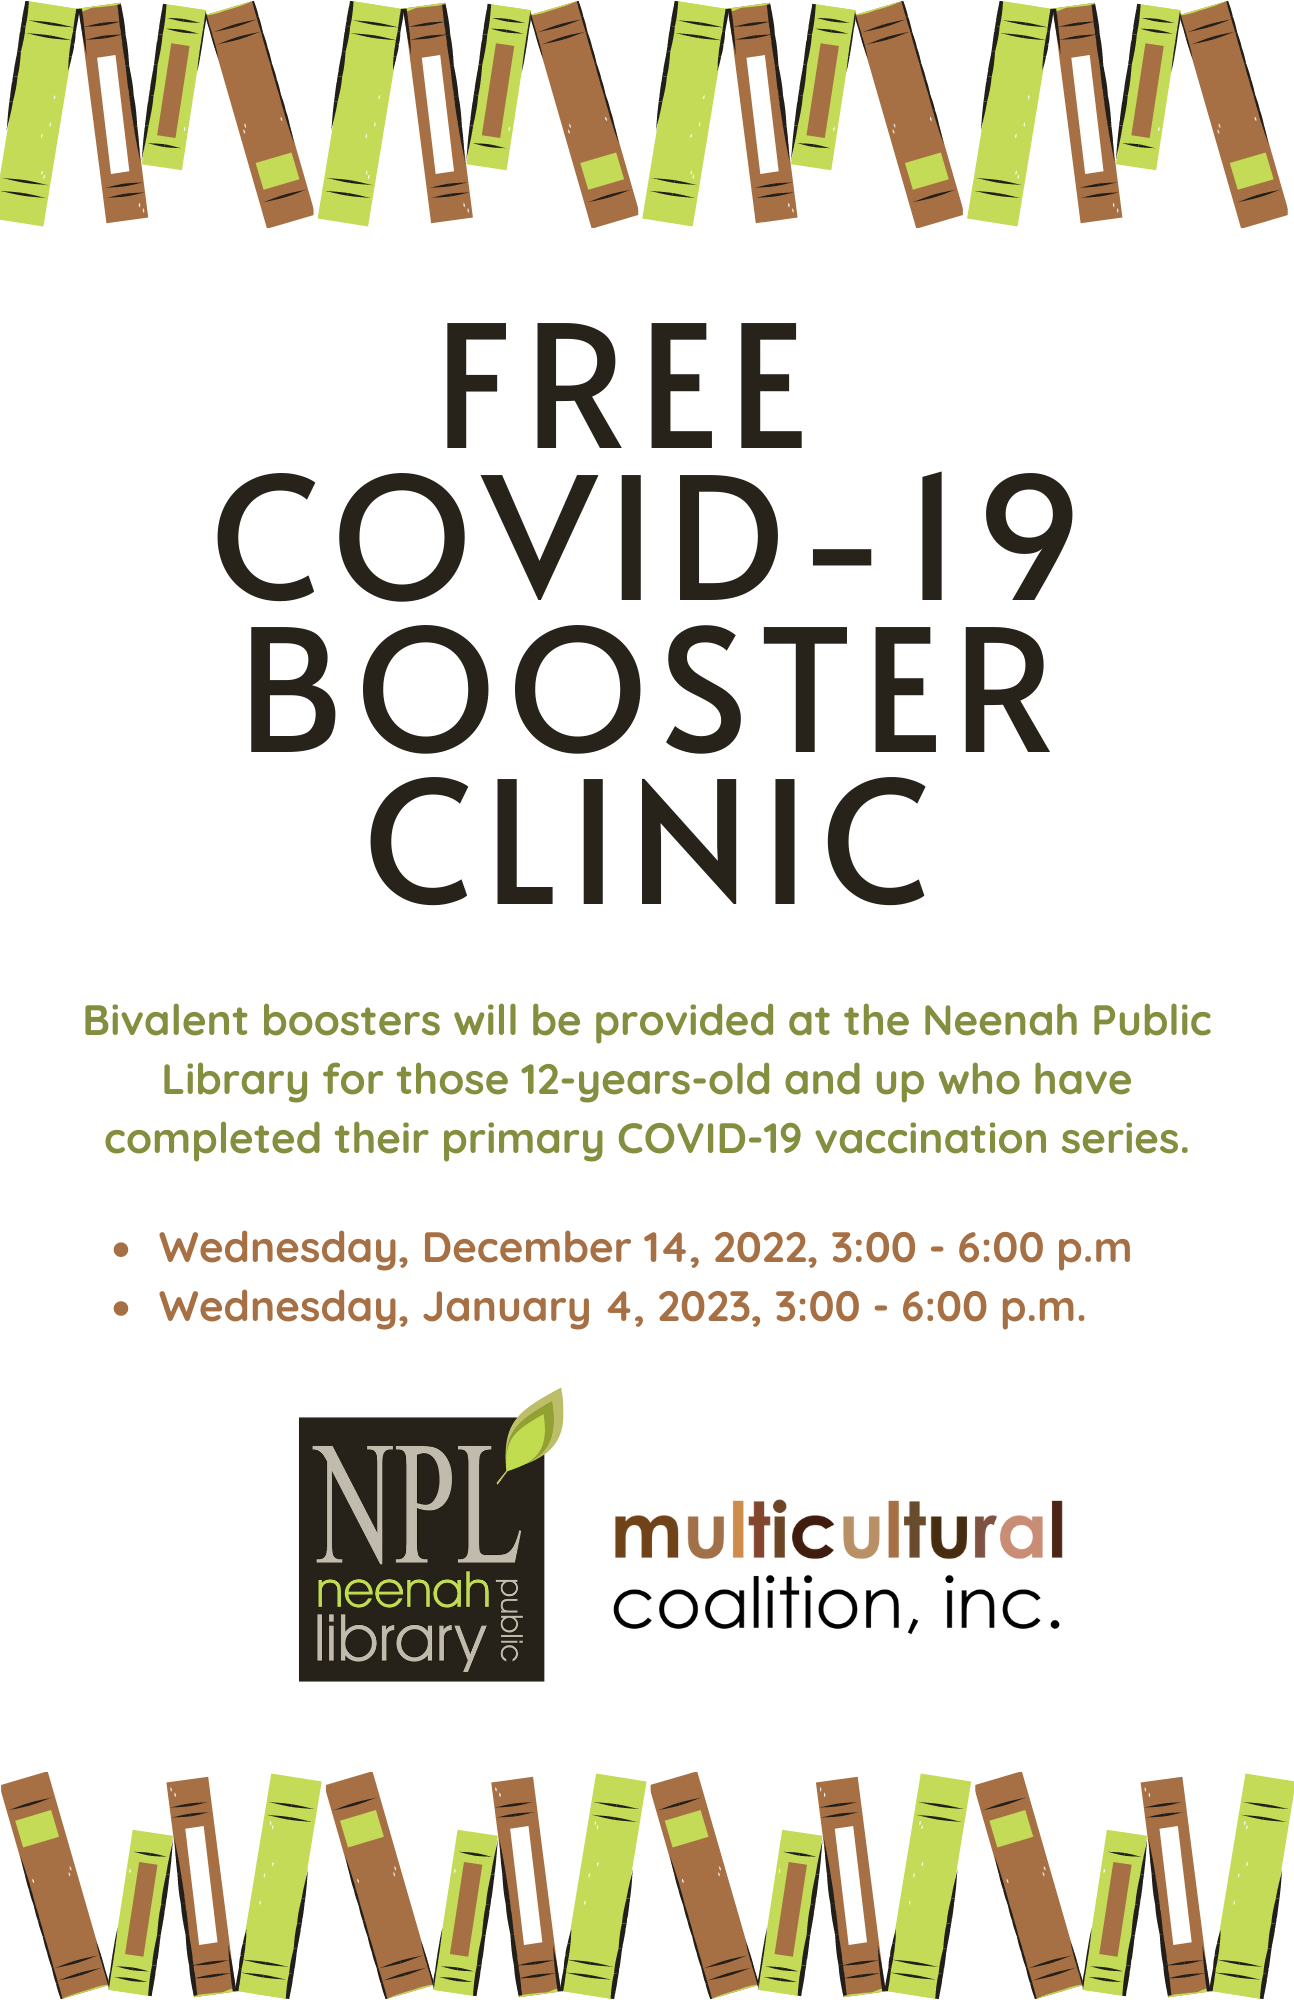 Flyer advertising a COVID-19 booster clinic in on December 14 and January 4